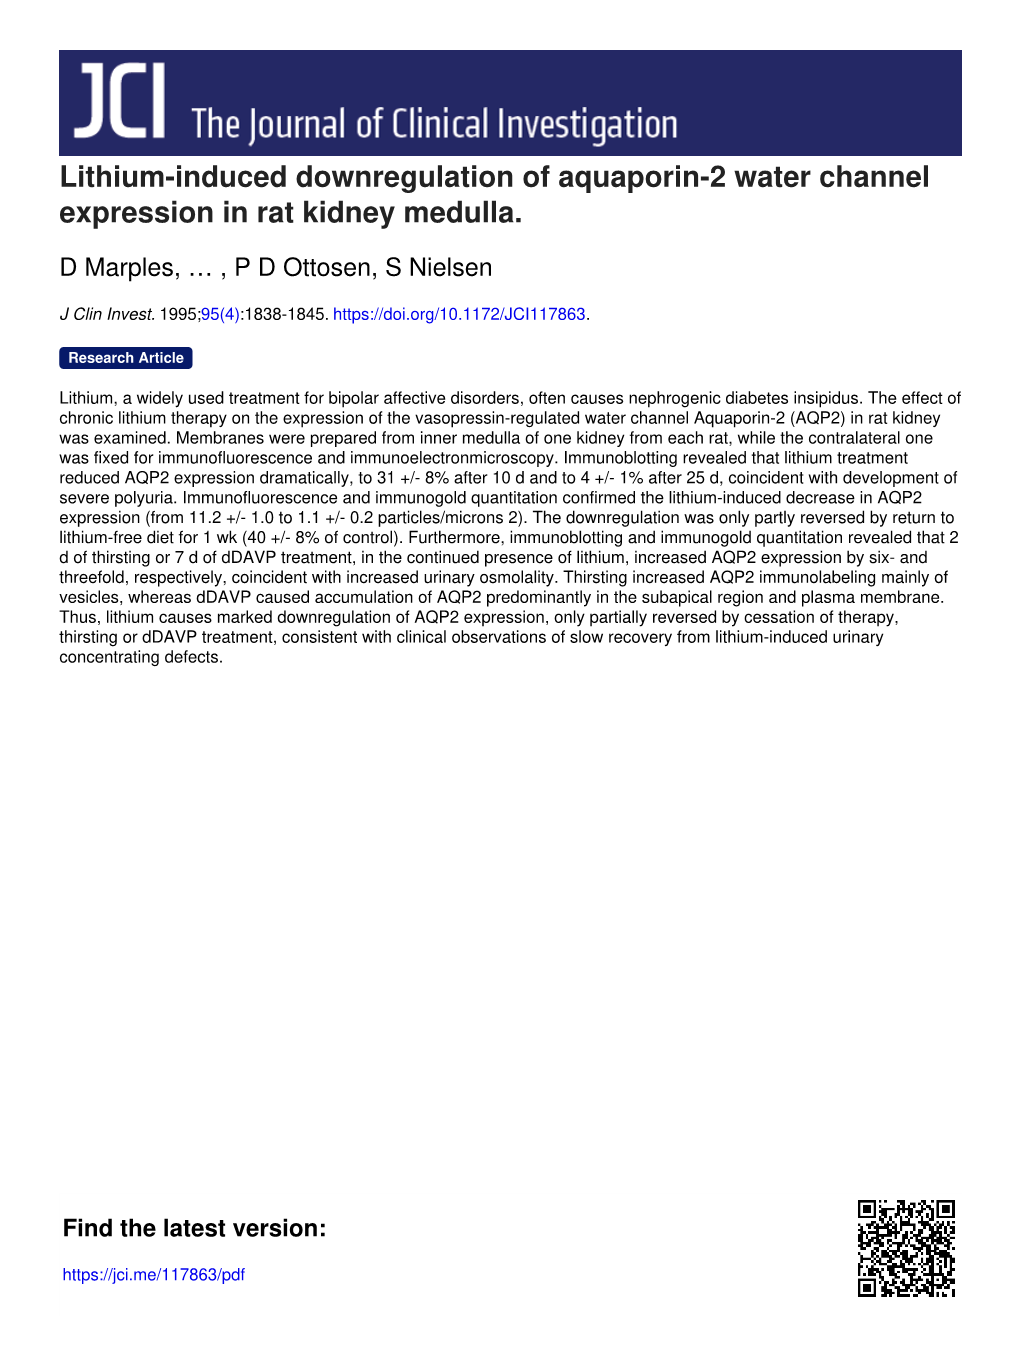 Lithium-Induced Downregulation of Aquaporin-2 Water Channel Expression in Rat Kidney Medulla